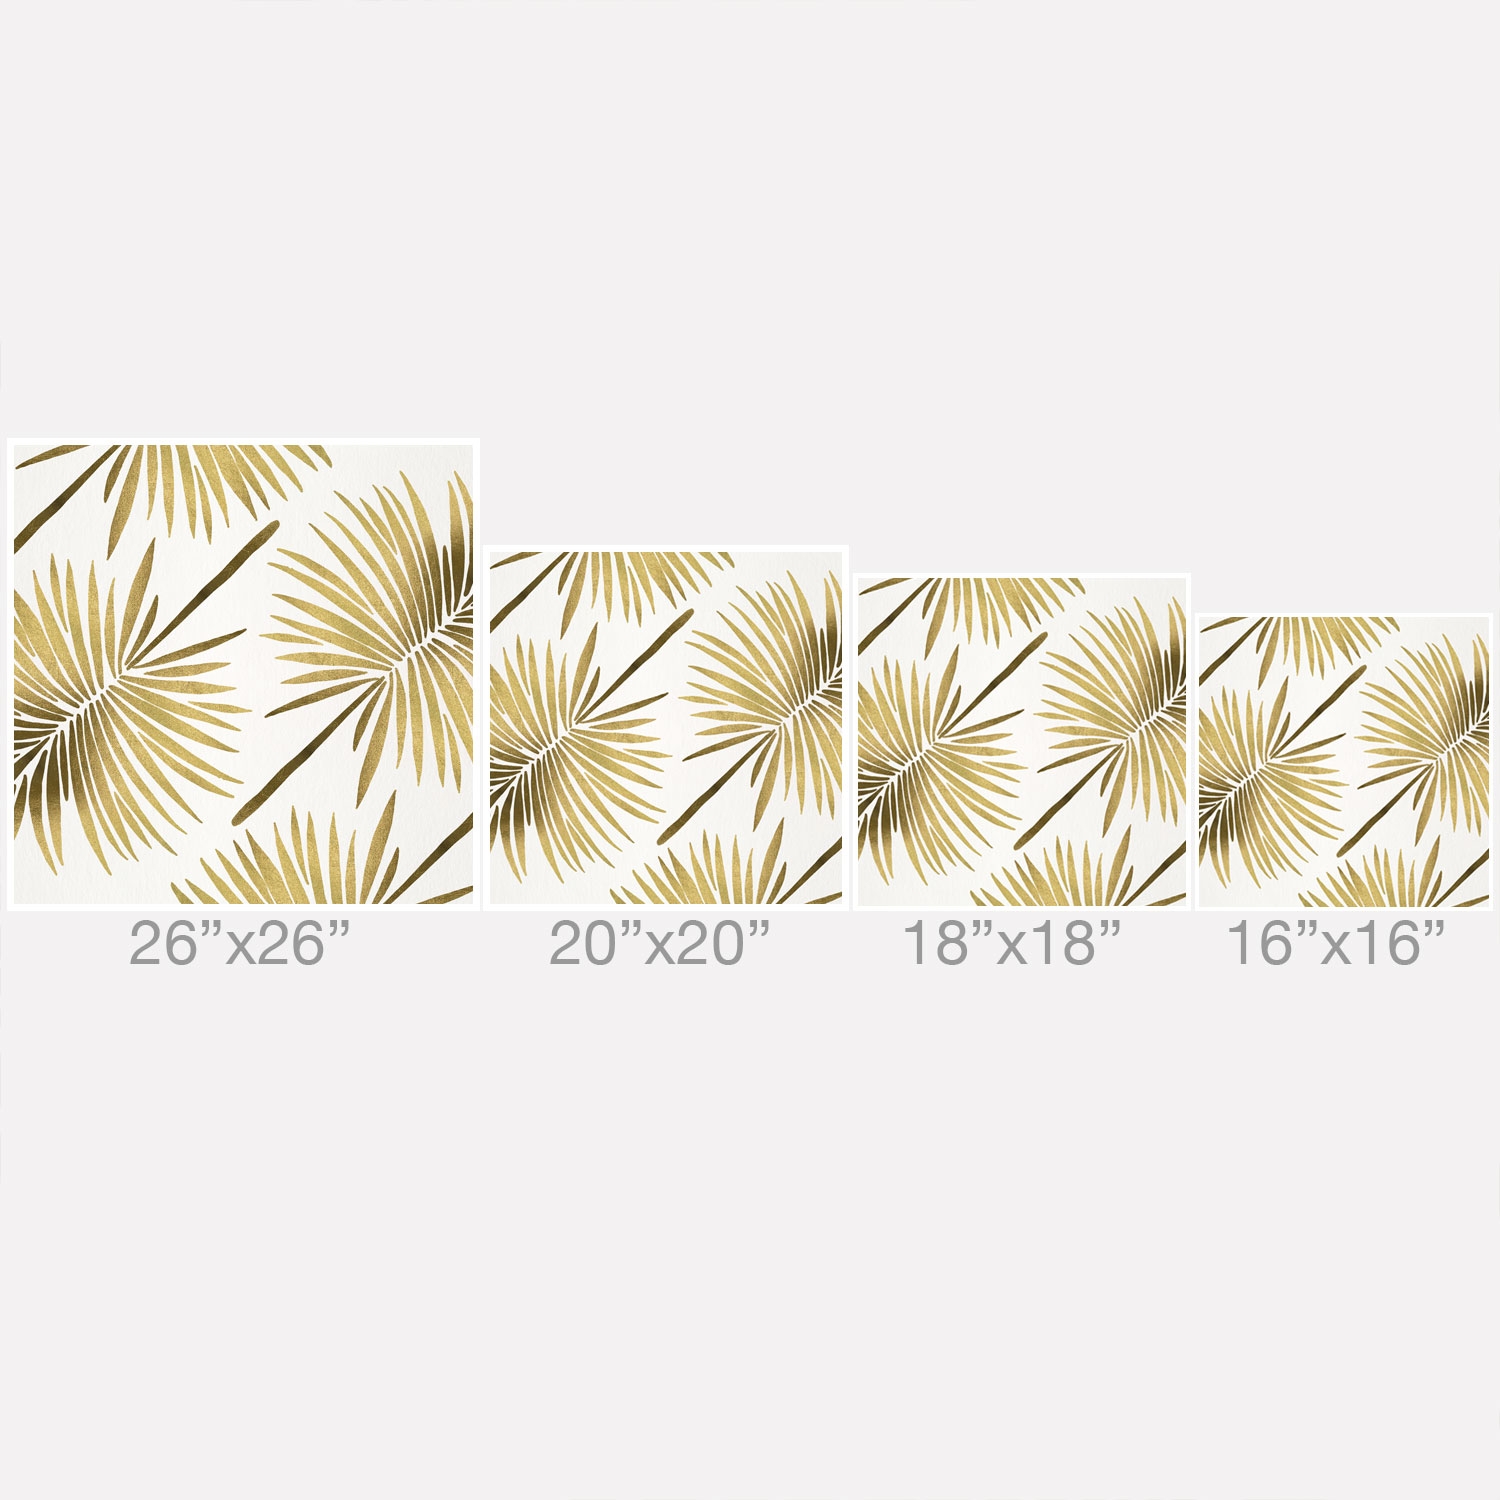 Tropical Fan Palm Gold Pattern by Cat Coquillette - Outdoor Throw Pillow 18" x 18" - Image 2